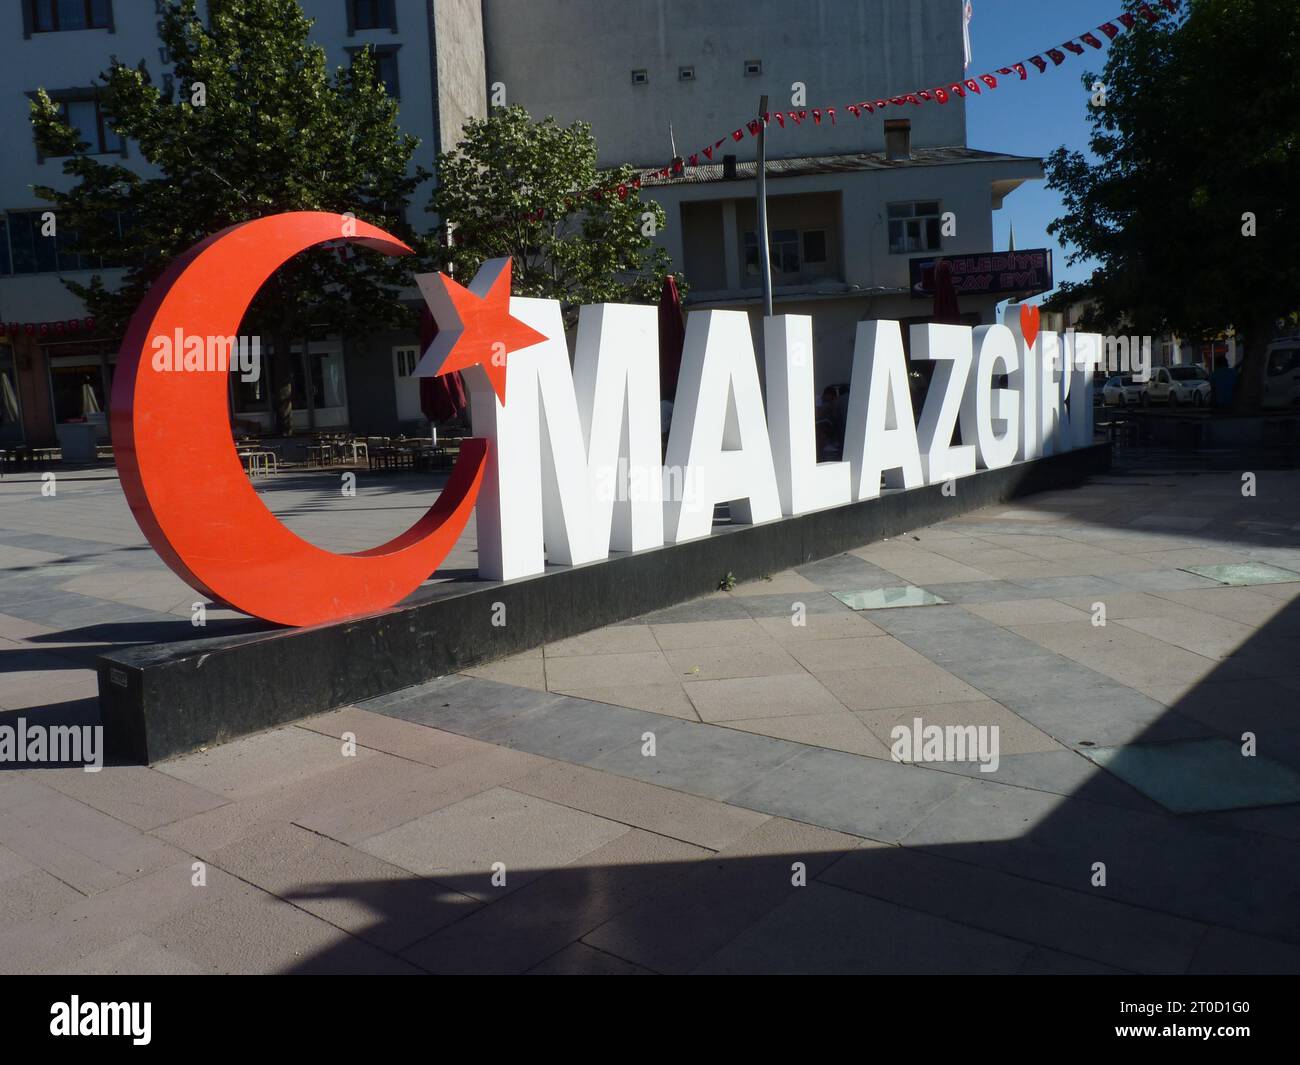 Malazgirt, Mus, Turkey, July 3, 2019: Large letters placed in a square forming the name of the city of Malazgirt in Turkey Stock Photo